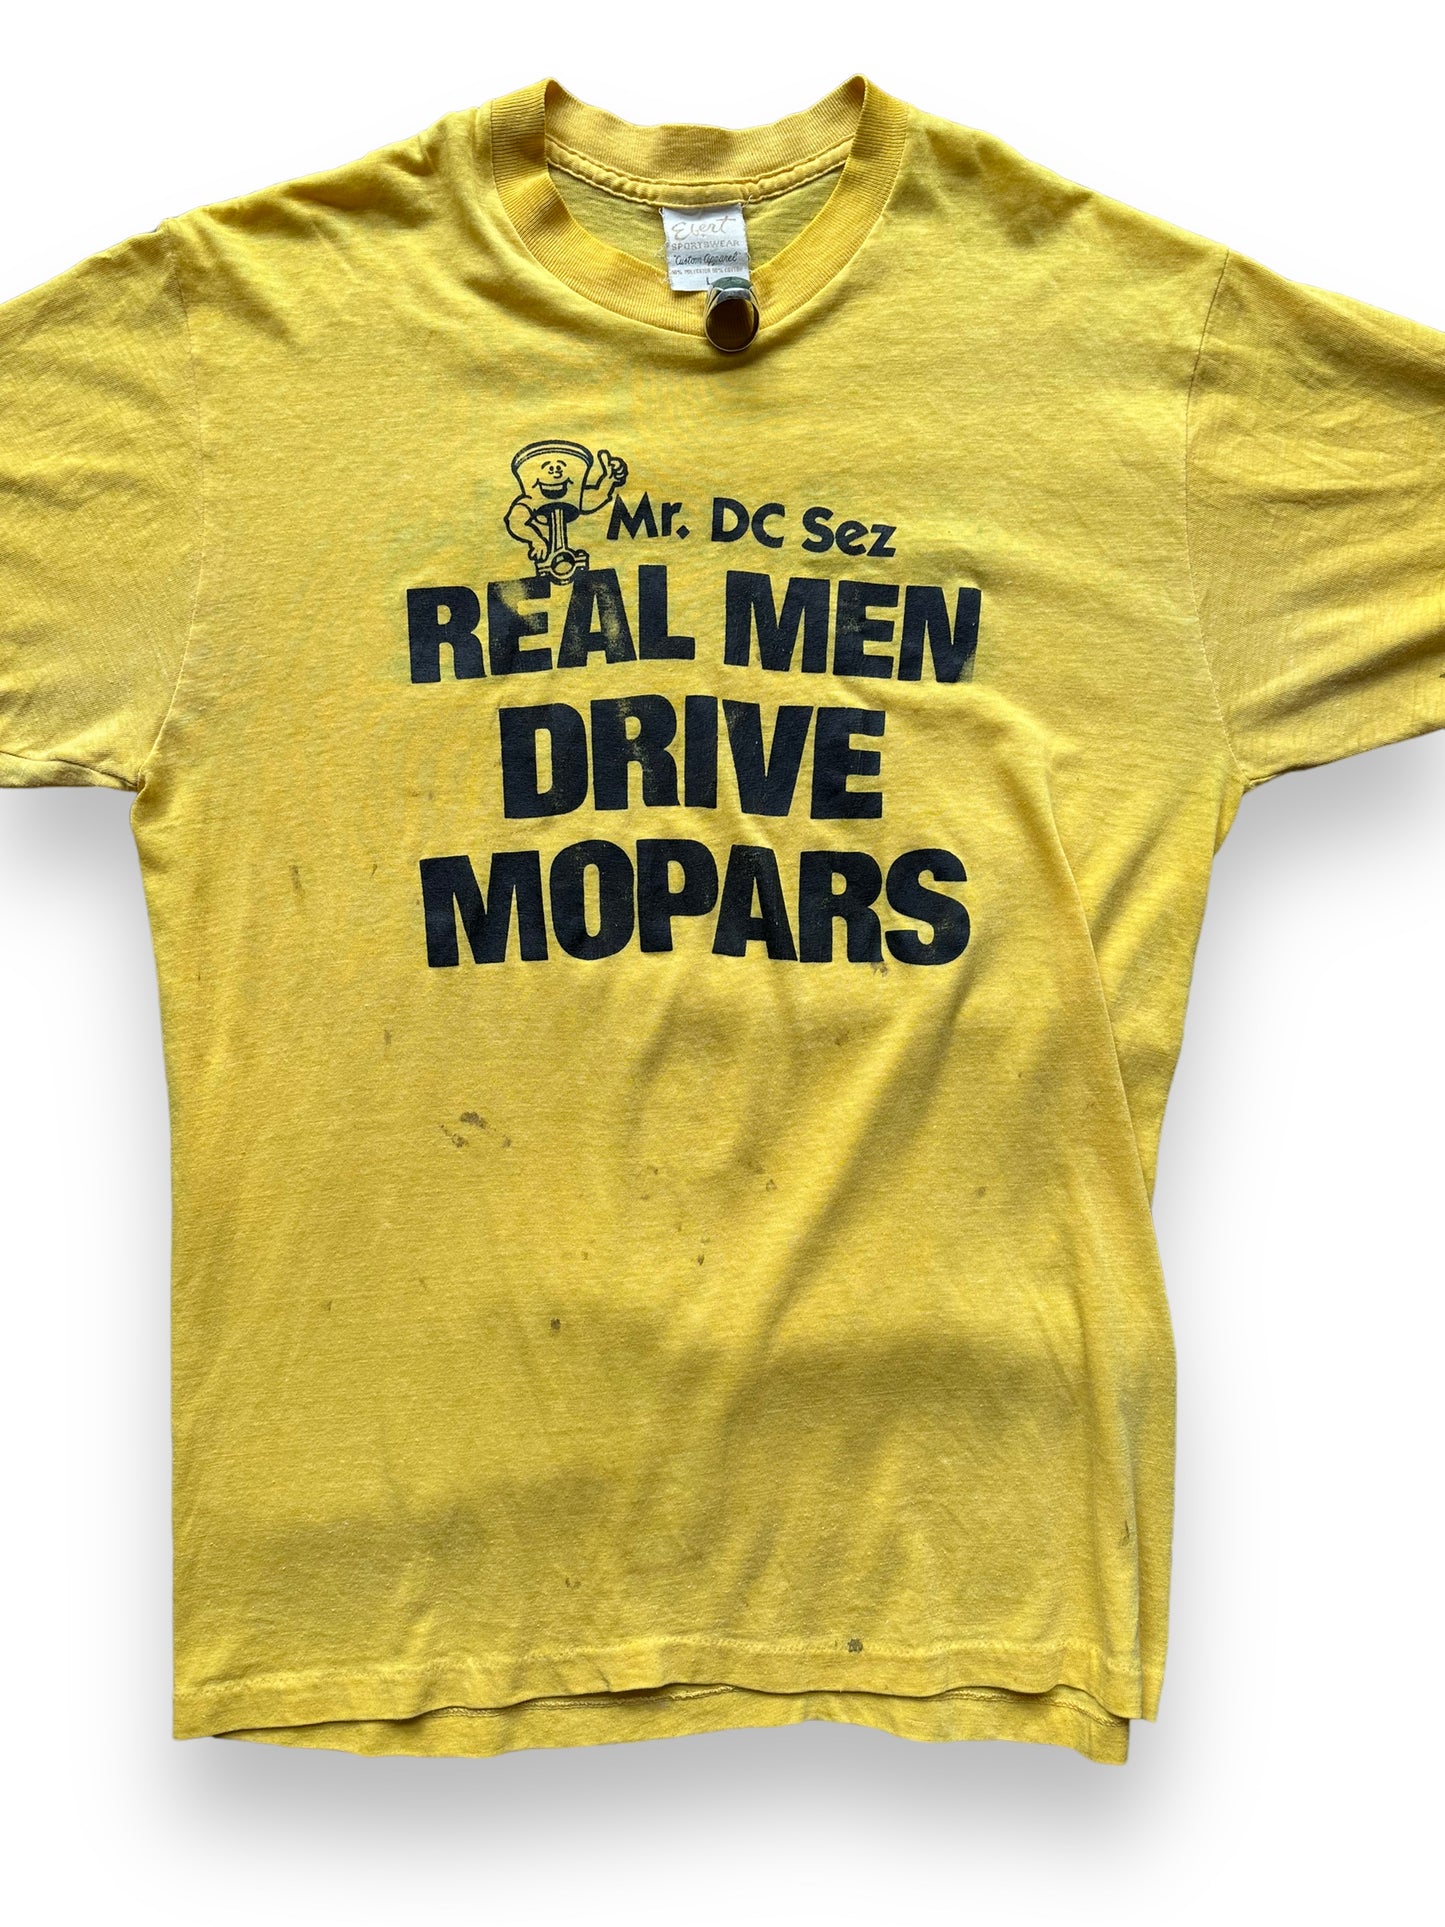 Front Detail on Vintage Real Men Drive Mopars Tee SZ L | Vintage Graphic T-Shirts Seattle | Barn Owl Vintage Tees Seattle